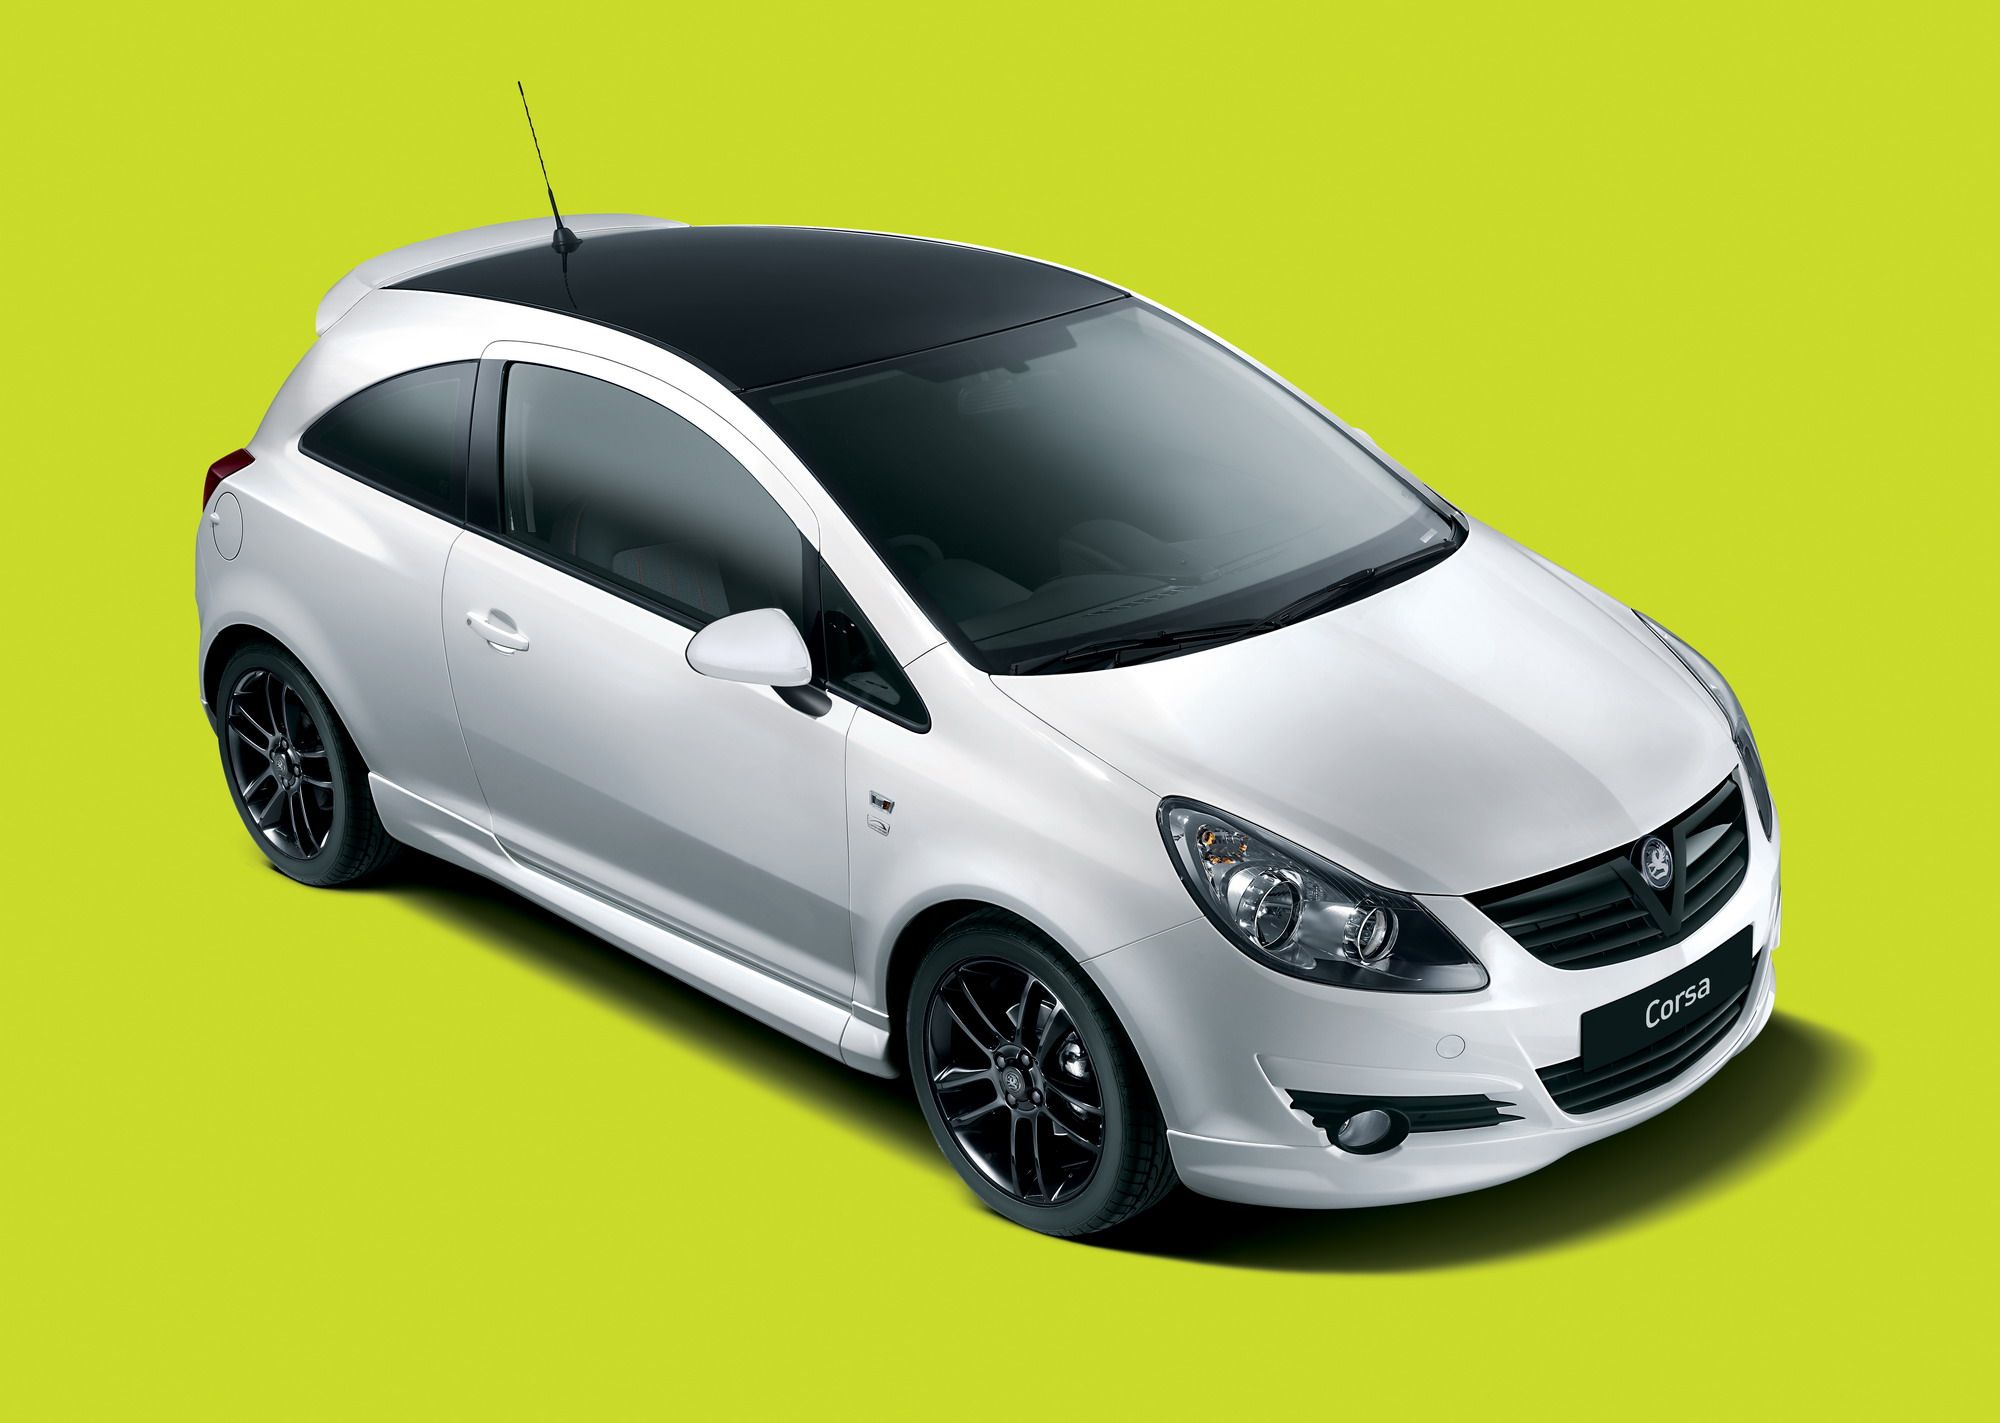 2010 Vauxhall Corsa Black and White Limited Edition